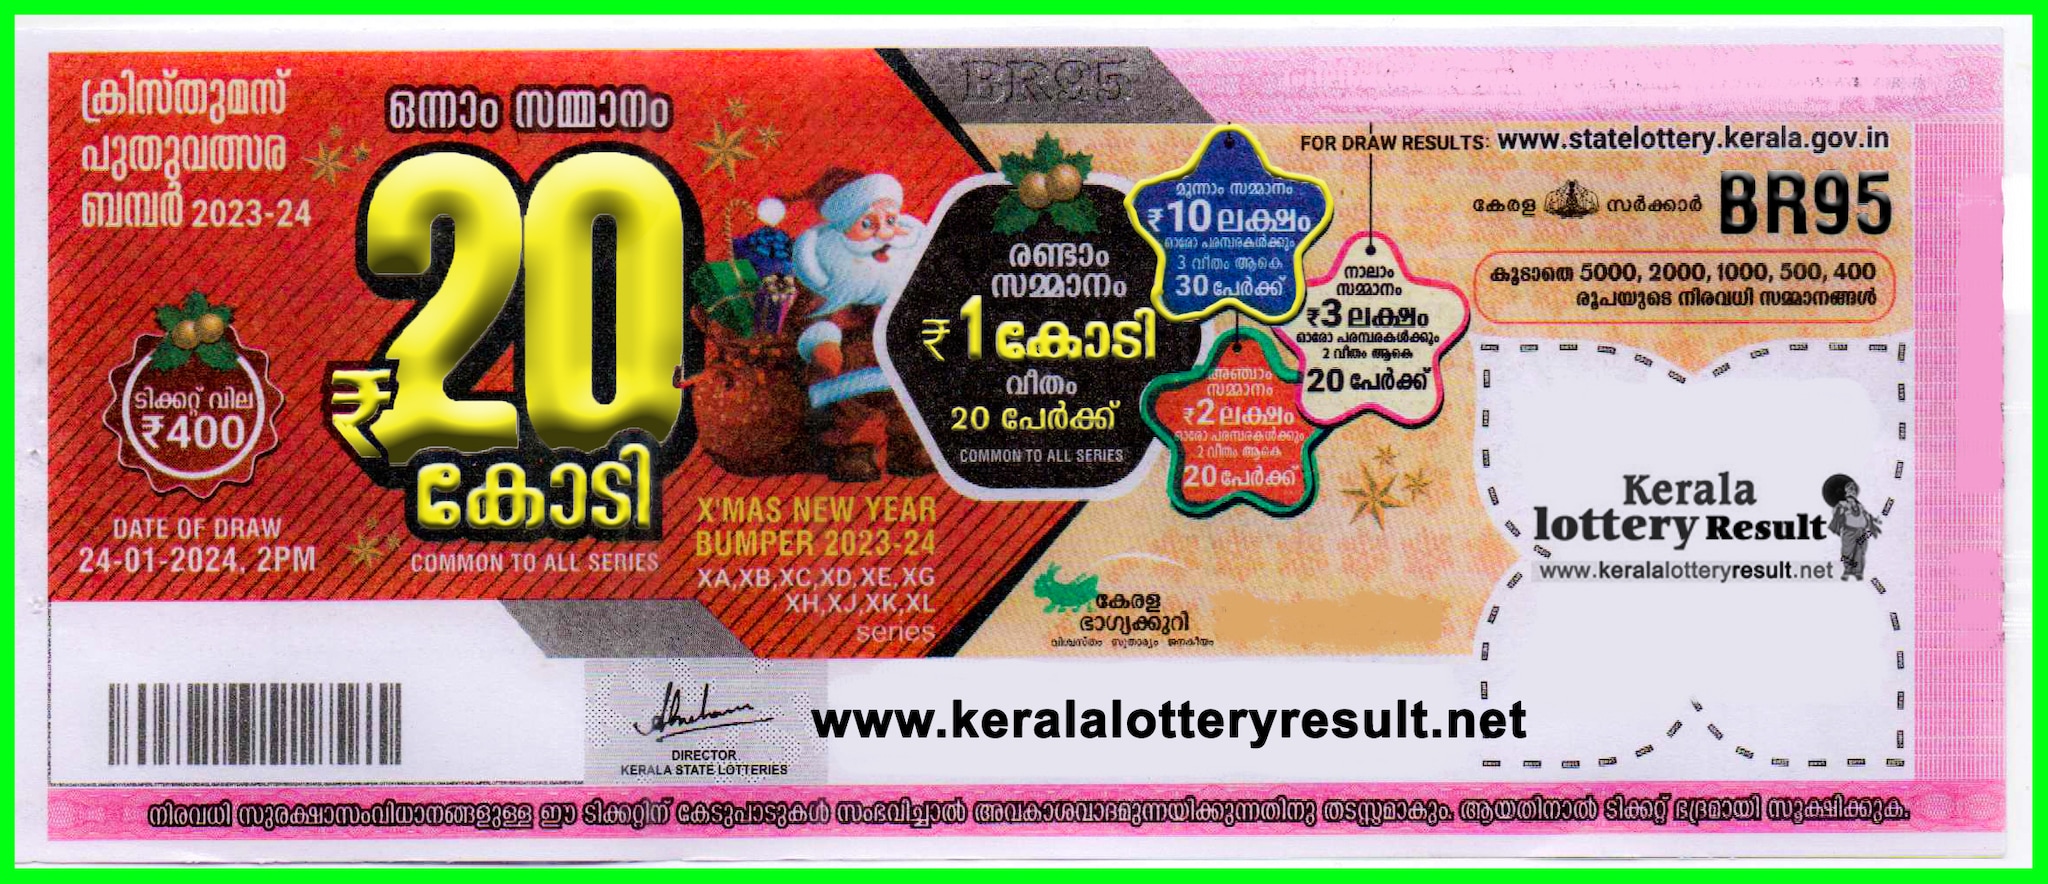 Consumerfed – The Kerala State Co-operatives Consumers' Federation Ltd